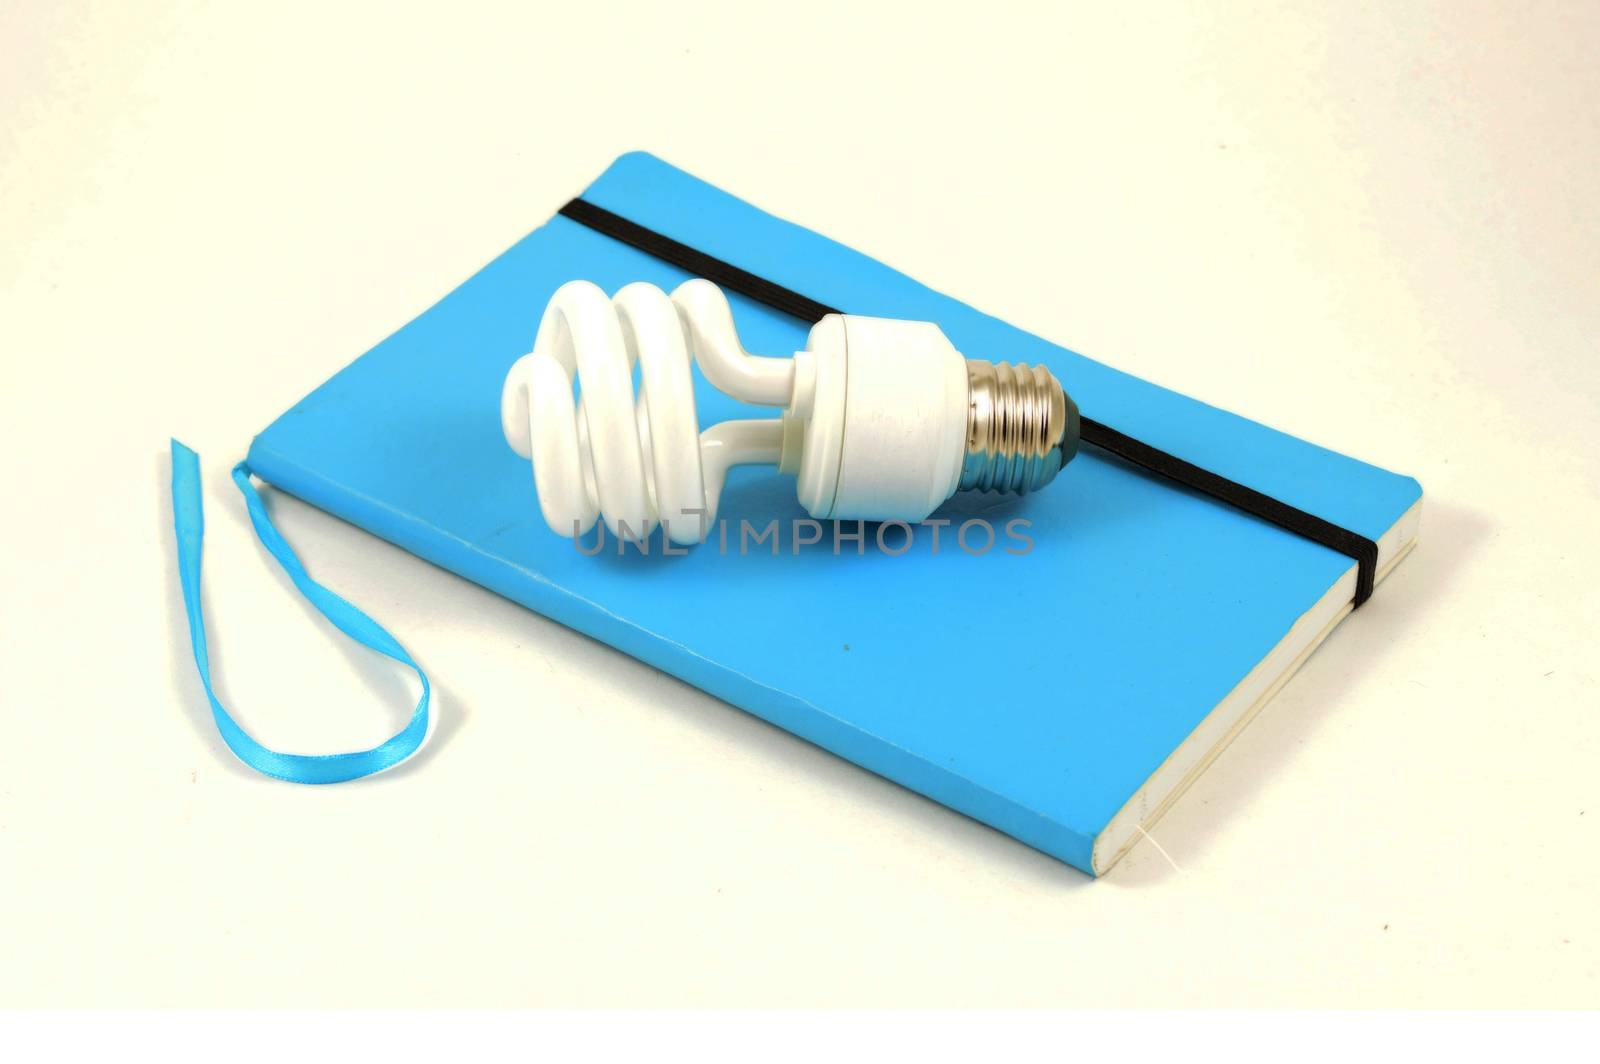 An isolated notebook and lightbulb to simulate ideas.